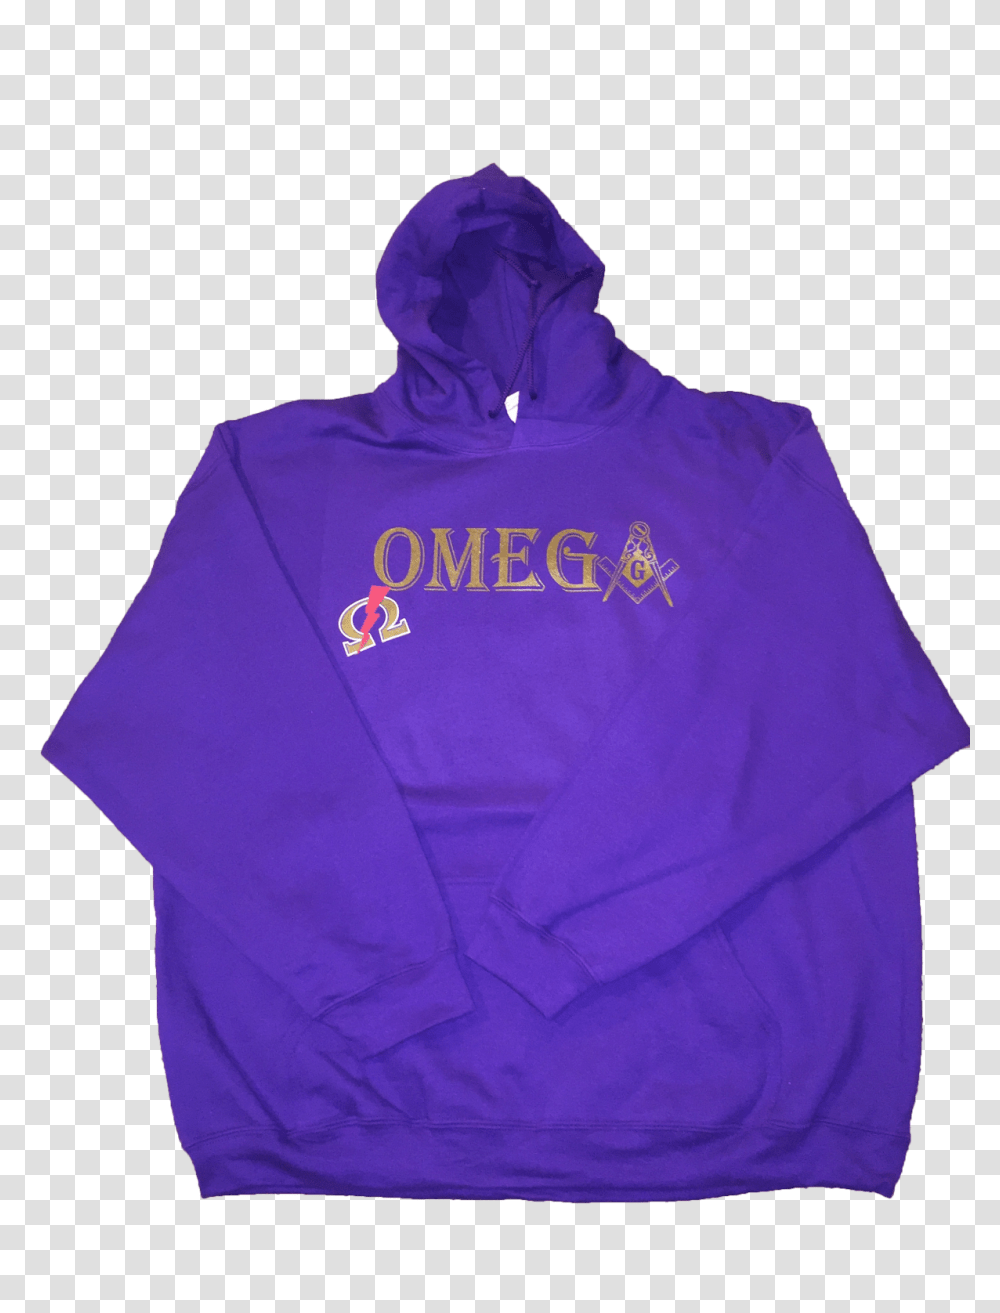 Download 1 Of 2free Shipping Omega Psi Phi Design Omega Apple Iphone 5, Clothing, Apparel, Sweatshirt, Sweater Transparent Png